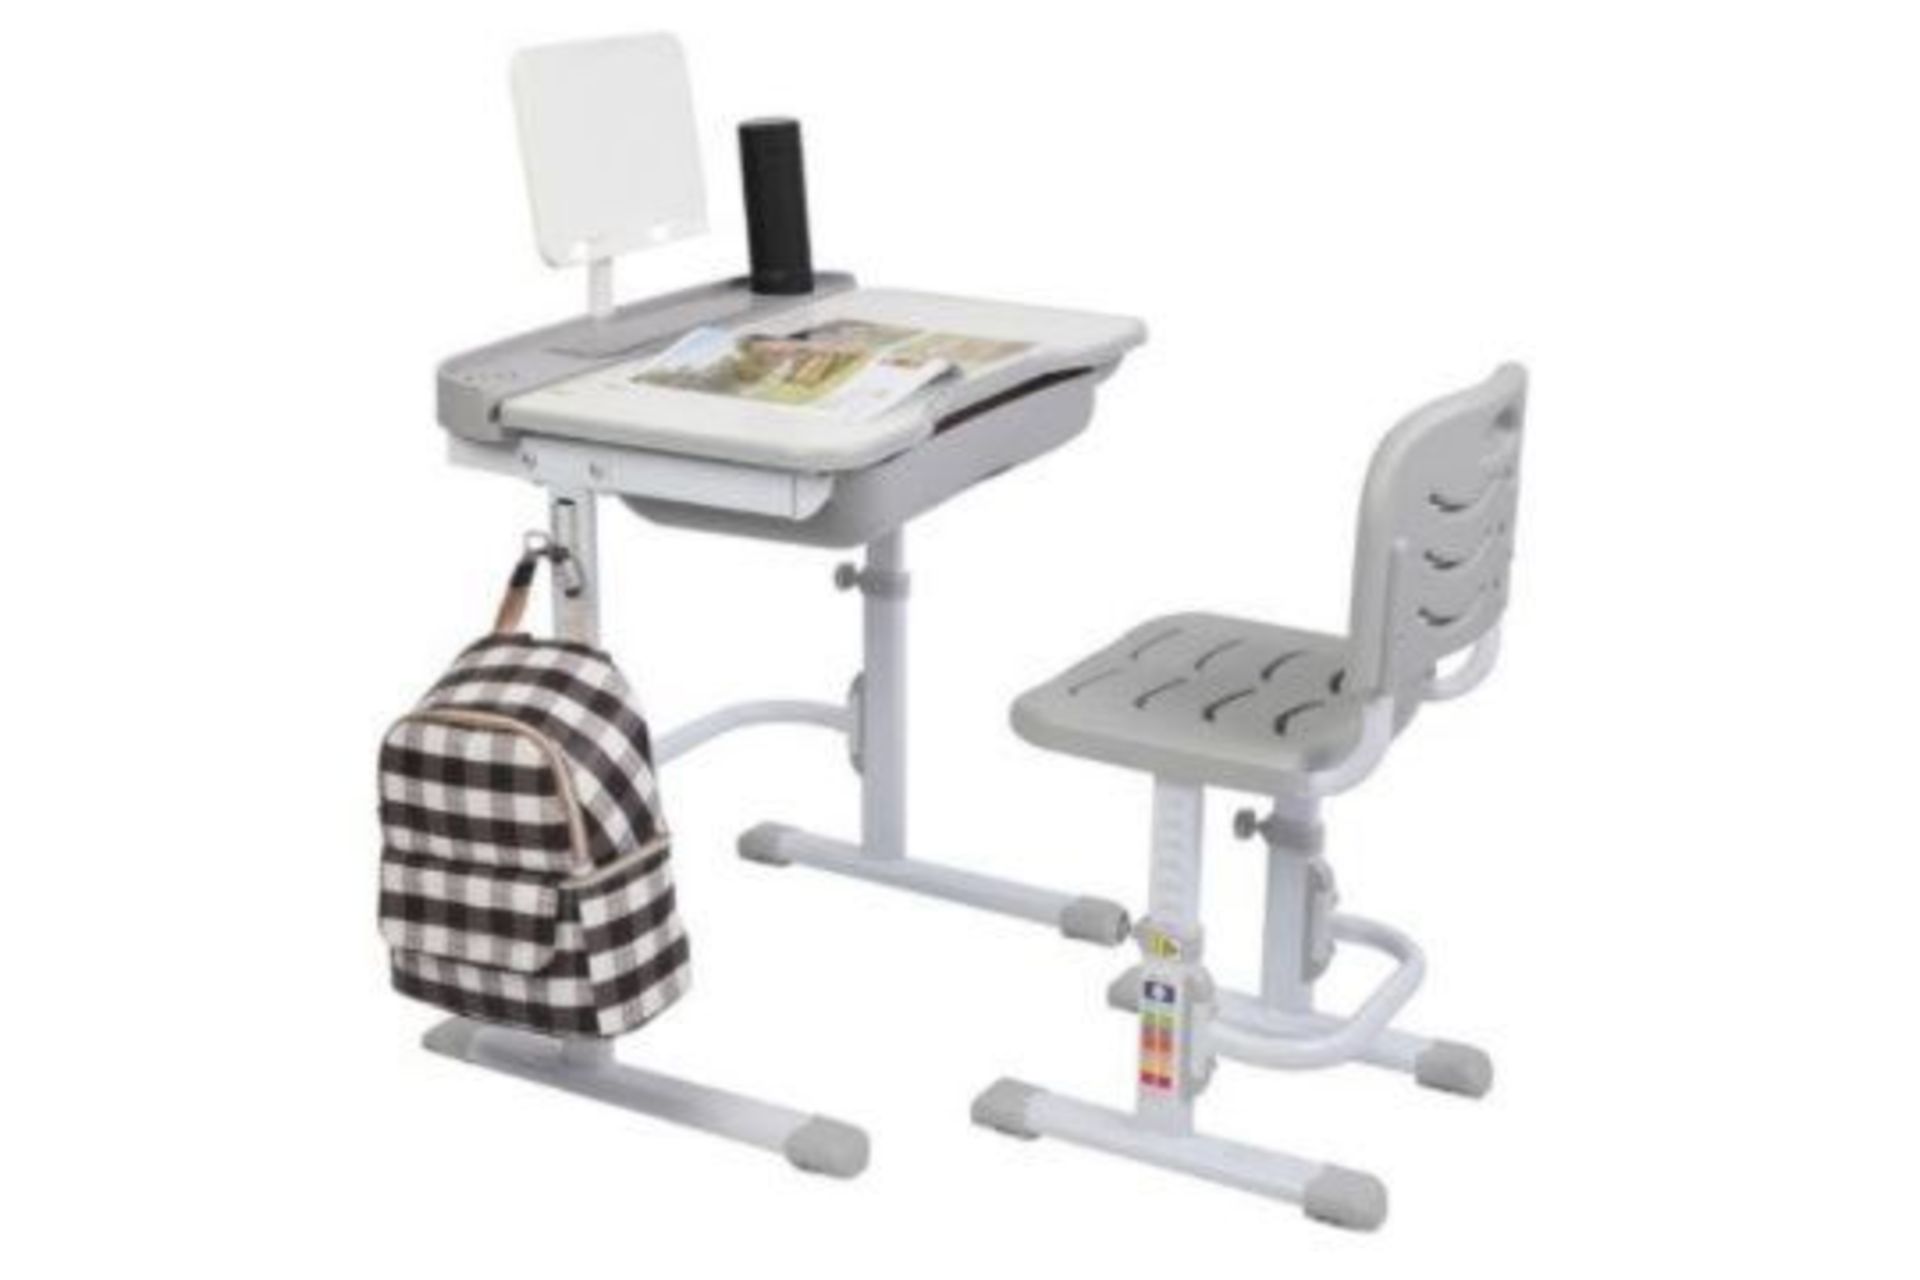 NEW BOXED Height Adjustable Kids Study Desk Chair Set with Drawer Tilted Desktop. RRP £149.99.